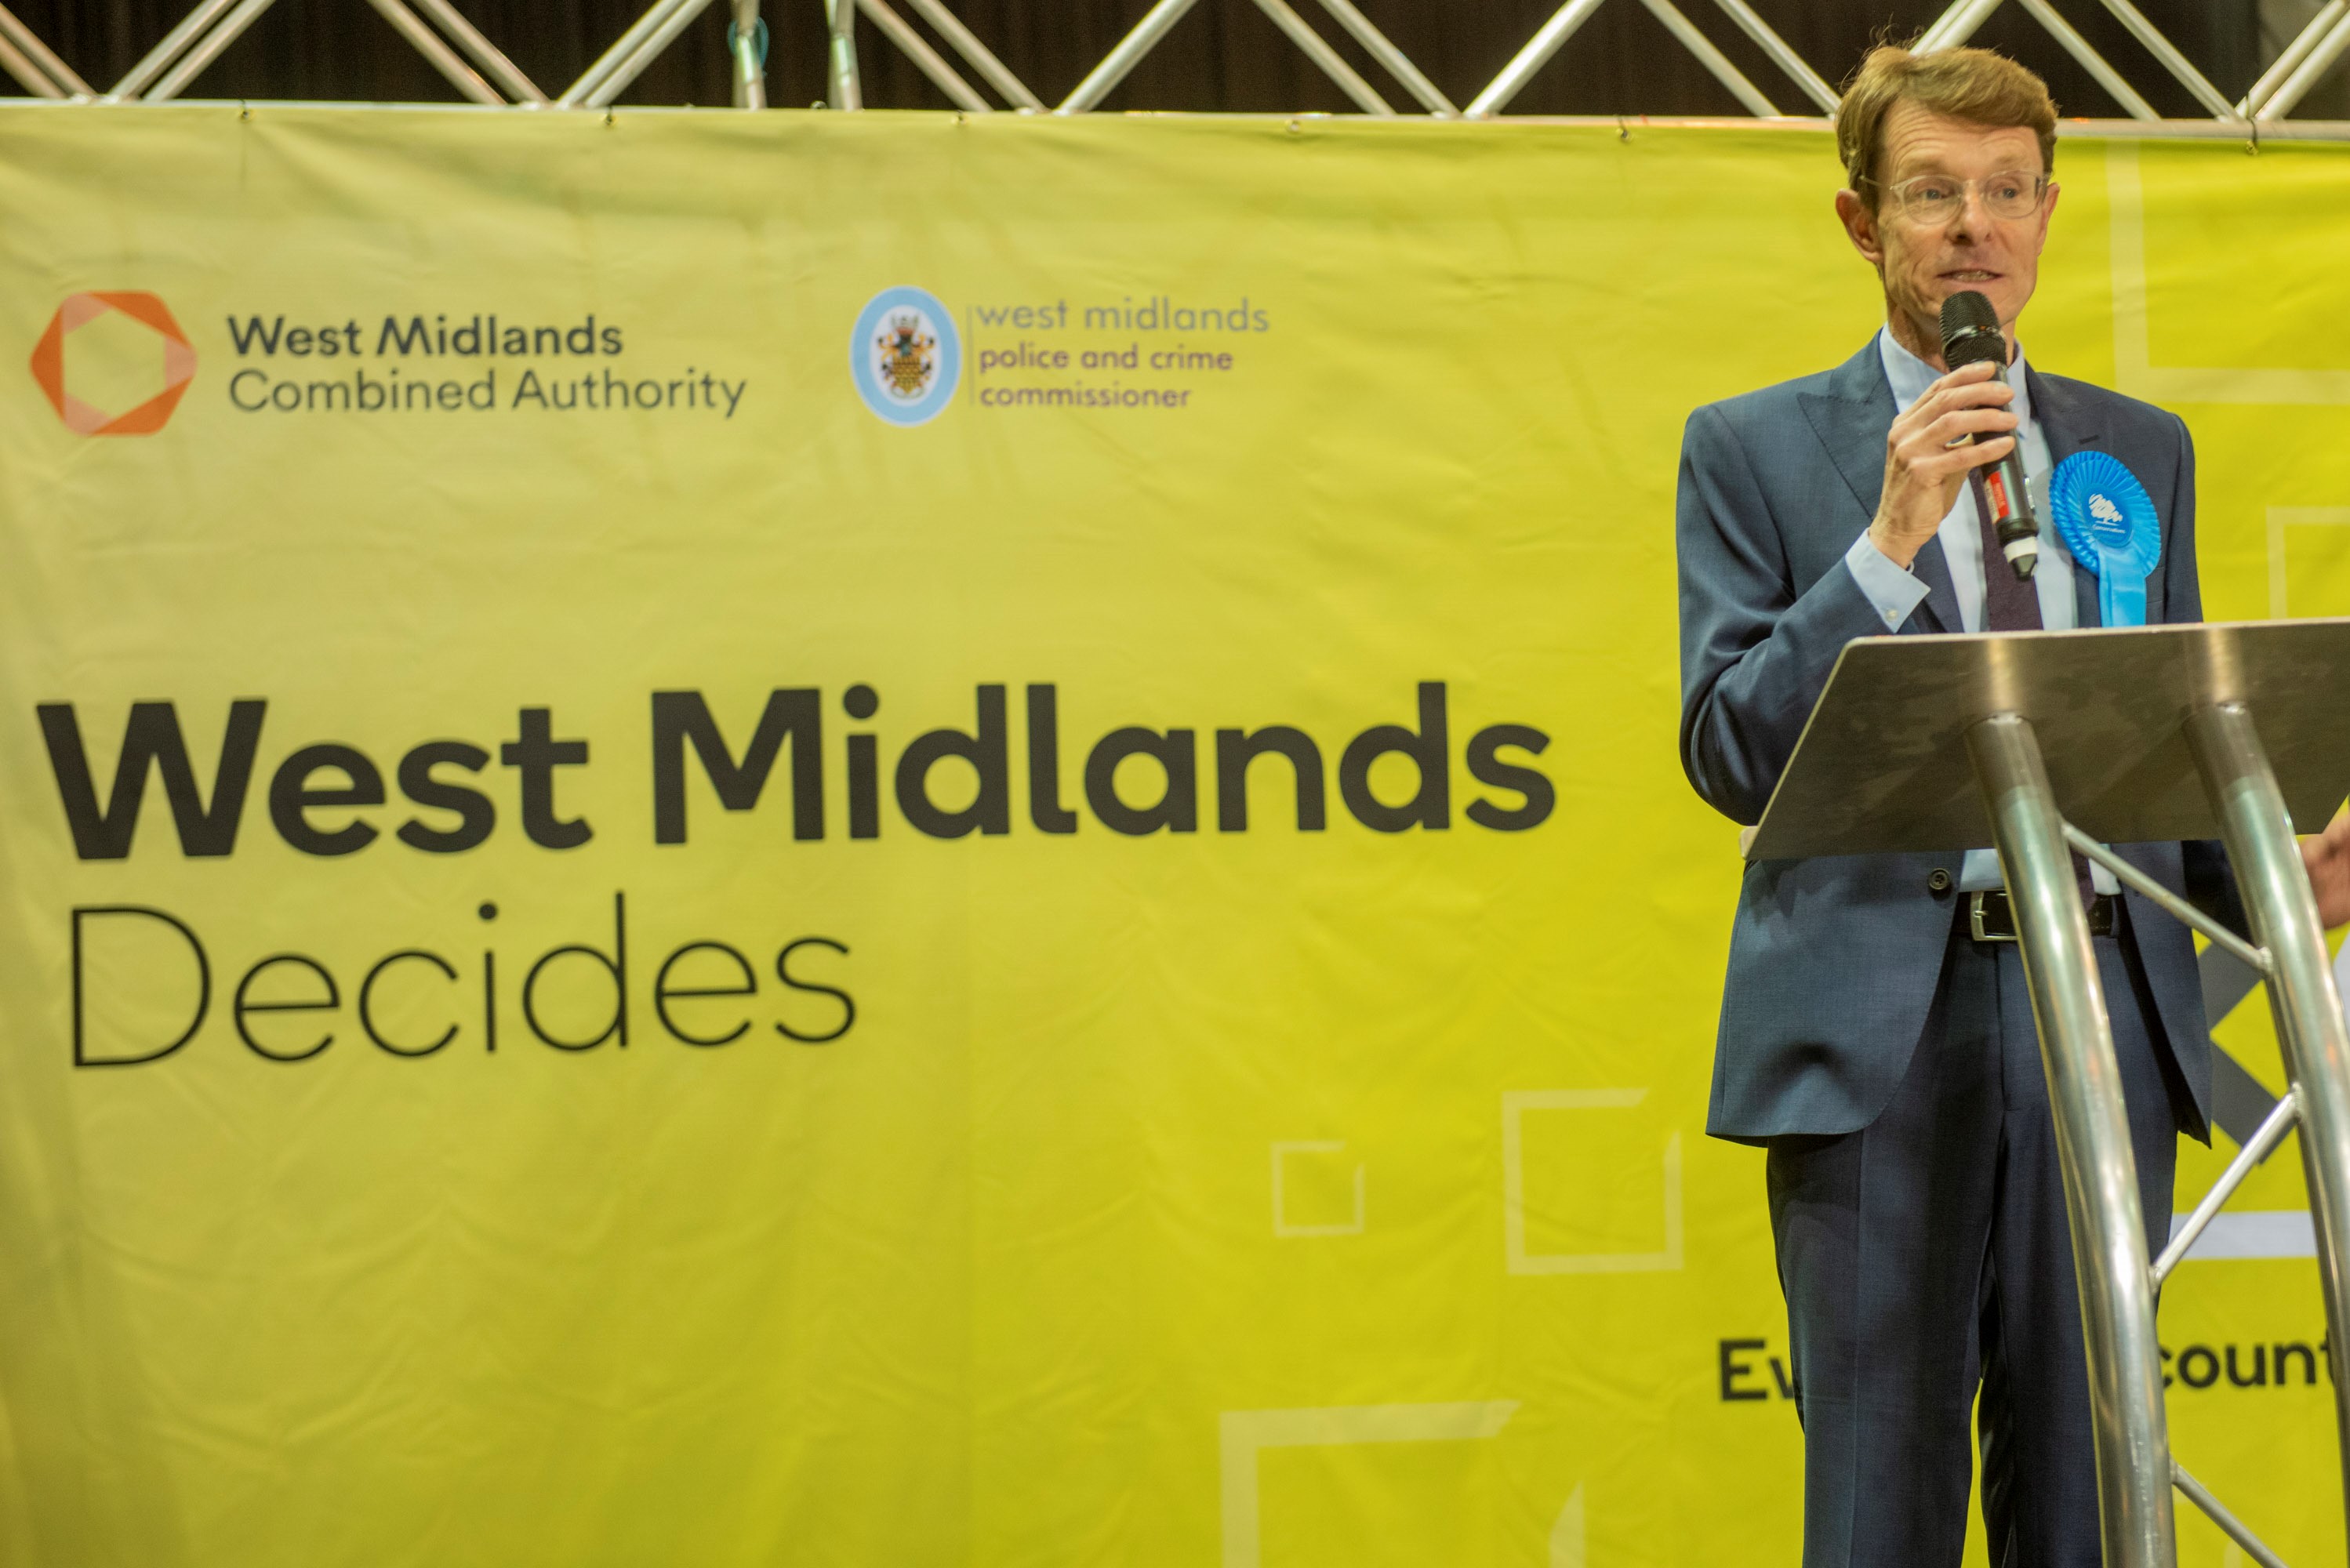 Andy Street re-elected as Mayor of the West Midlands